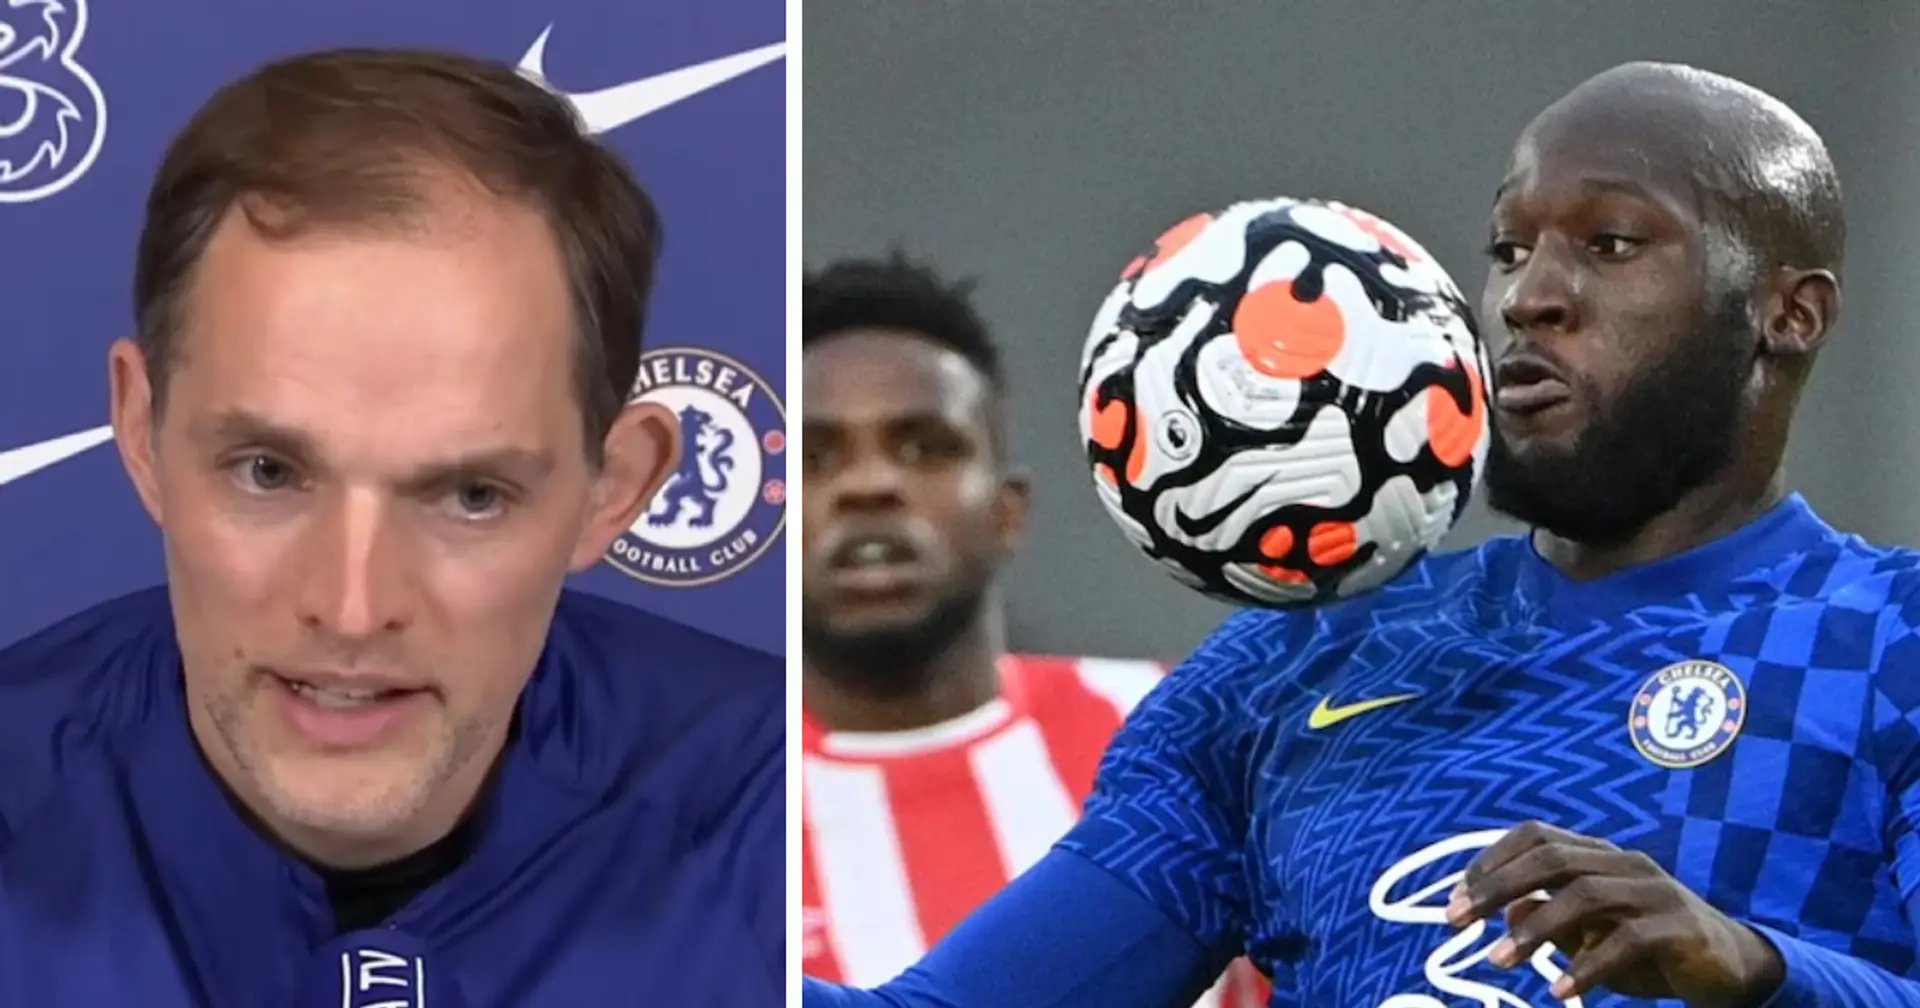 'I understand why people say this': Tuchel responds to suggestions that Chelsea play better without Lukaku